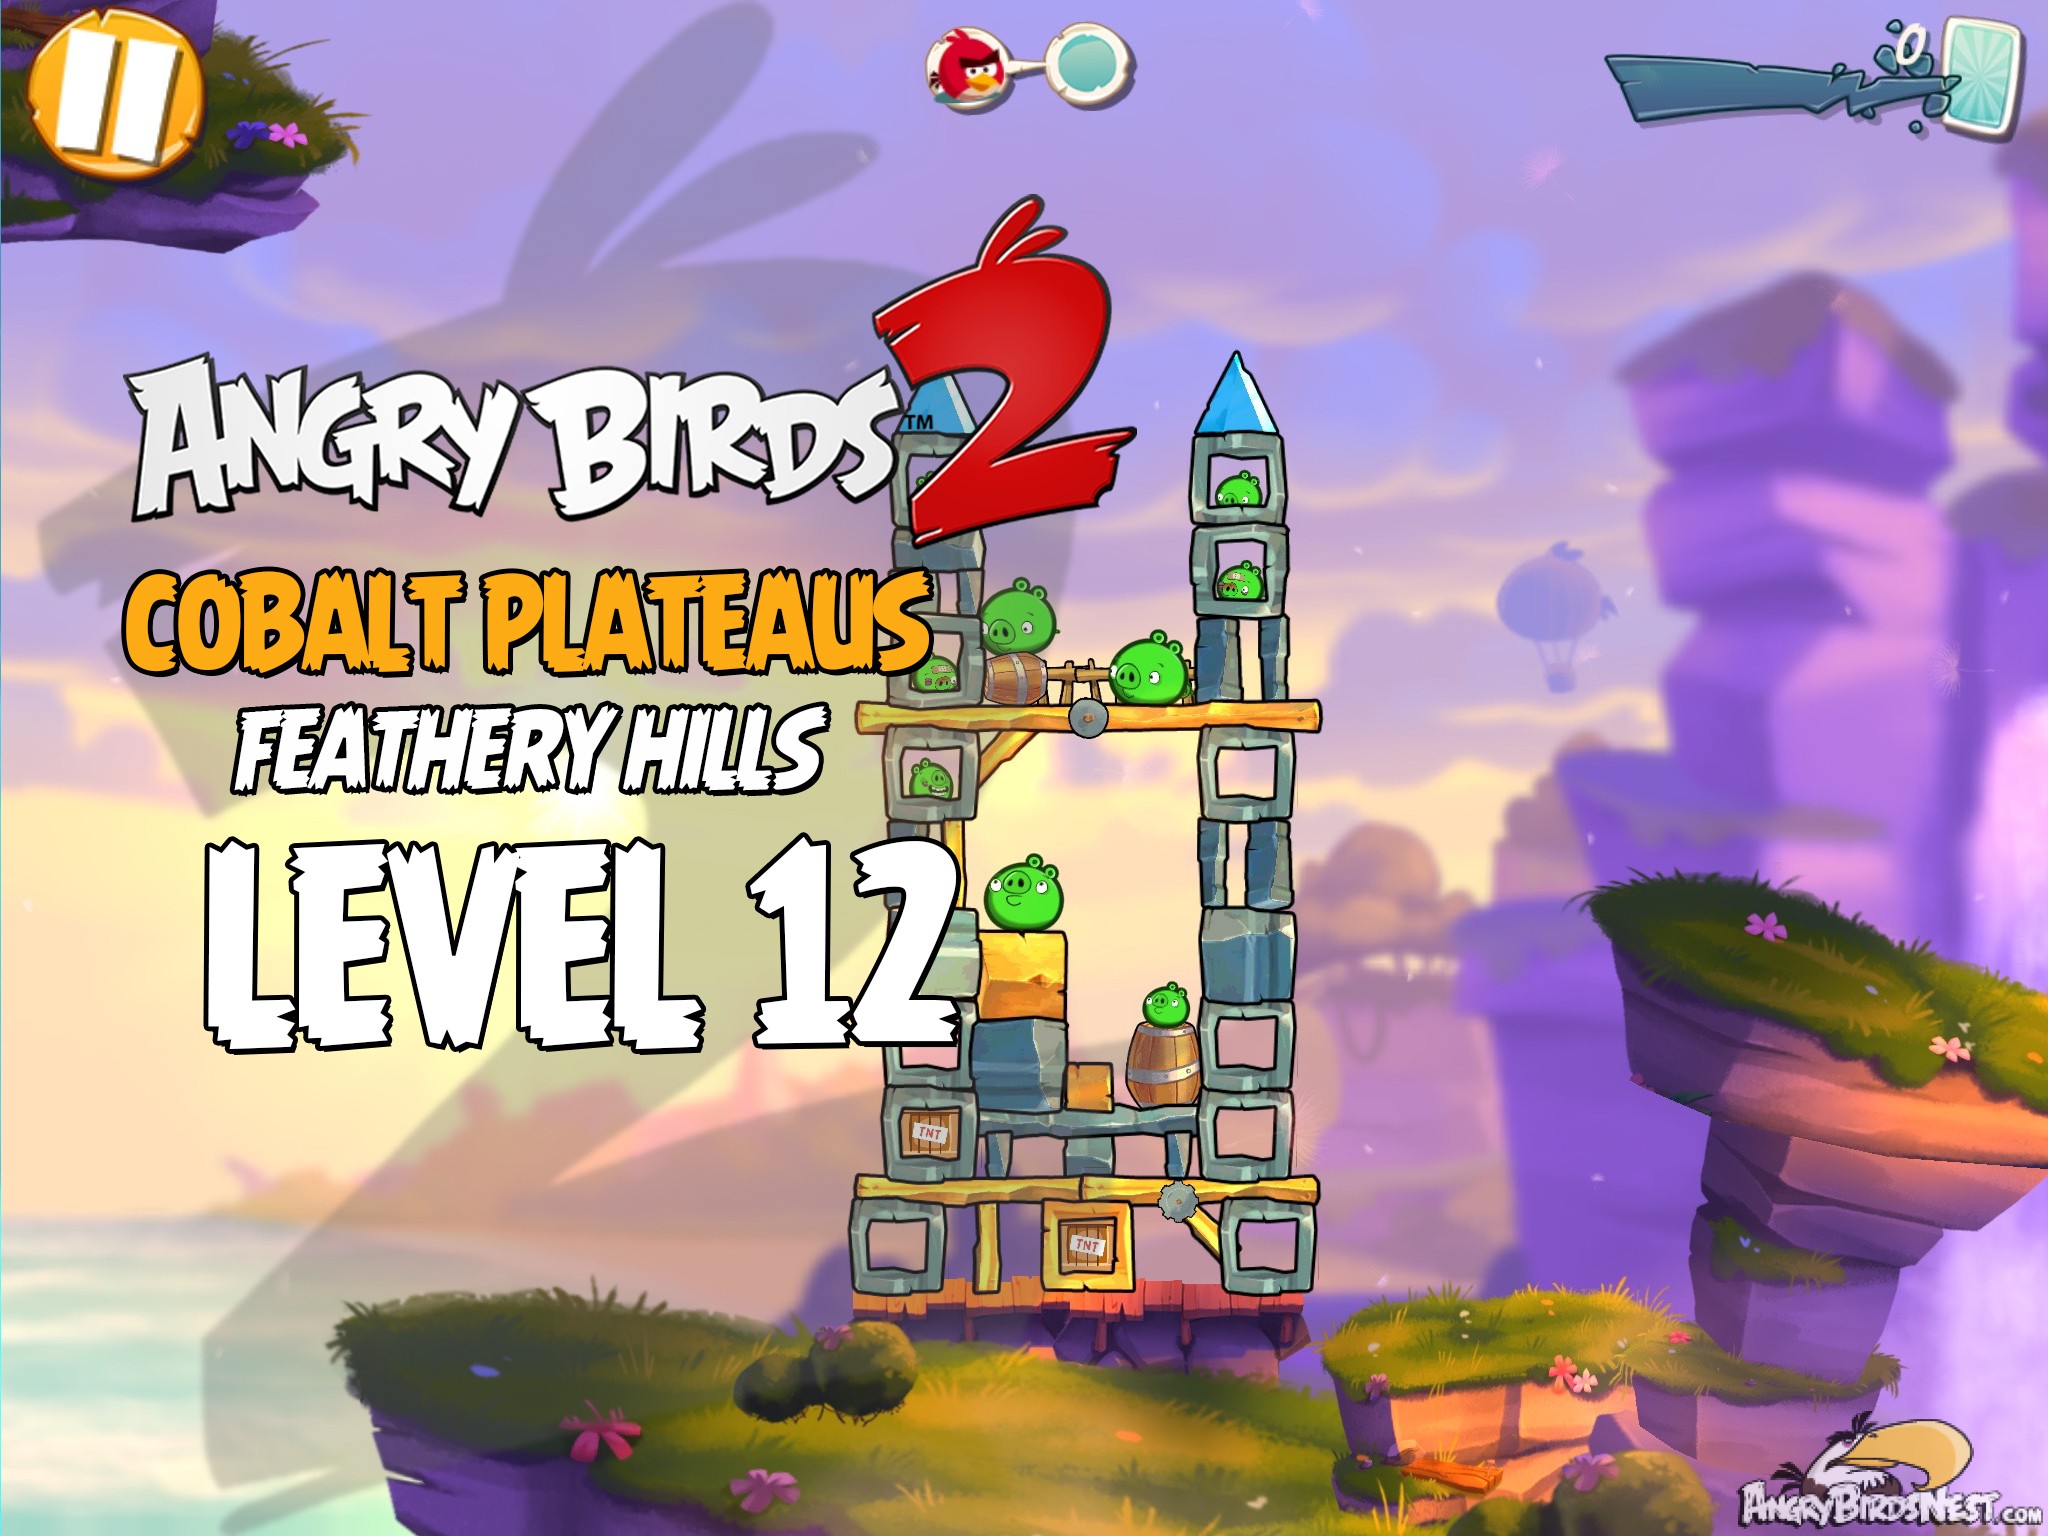 Angry Birds 2 Cobalt Plateaus Feathery Hills Level 12